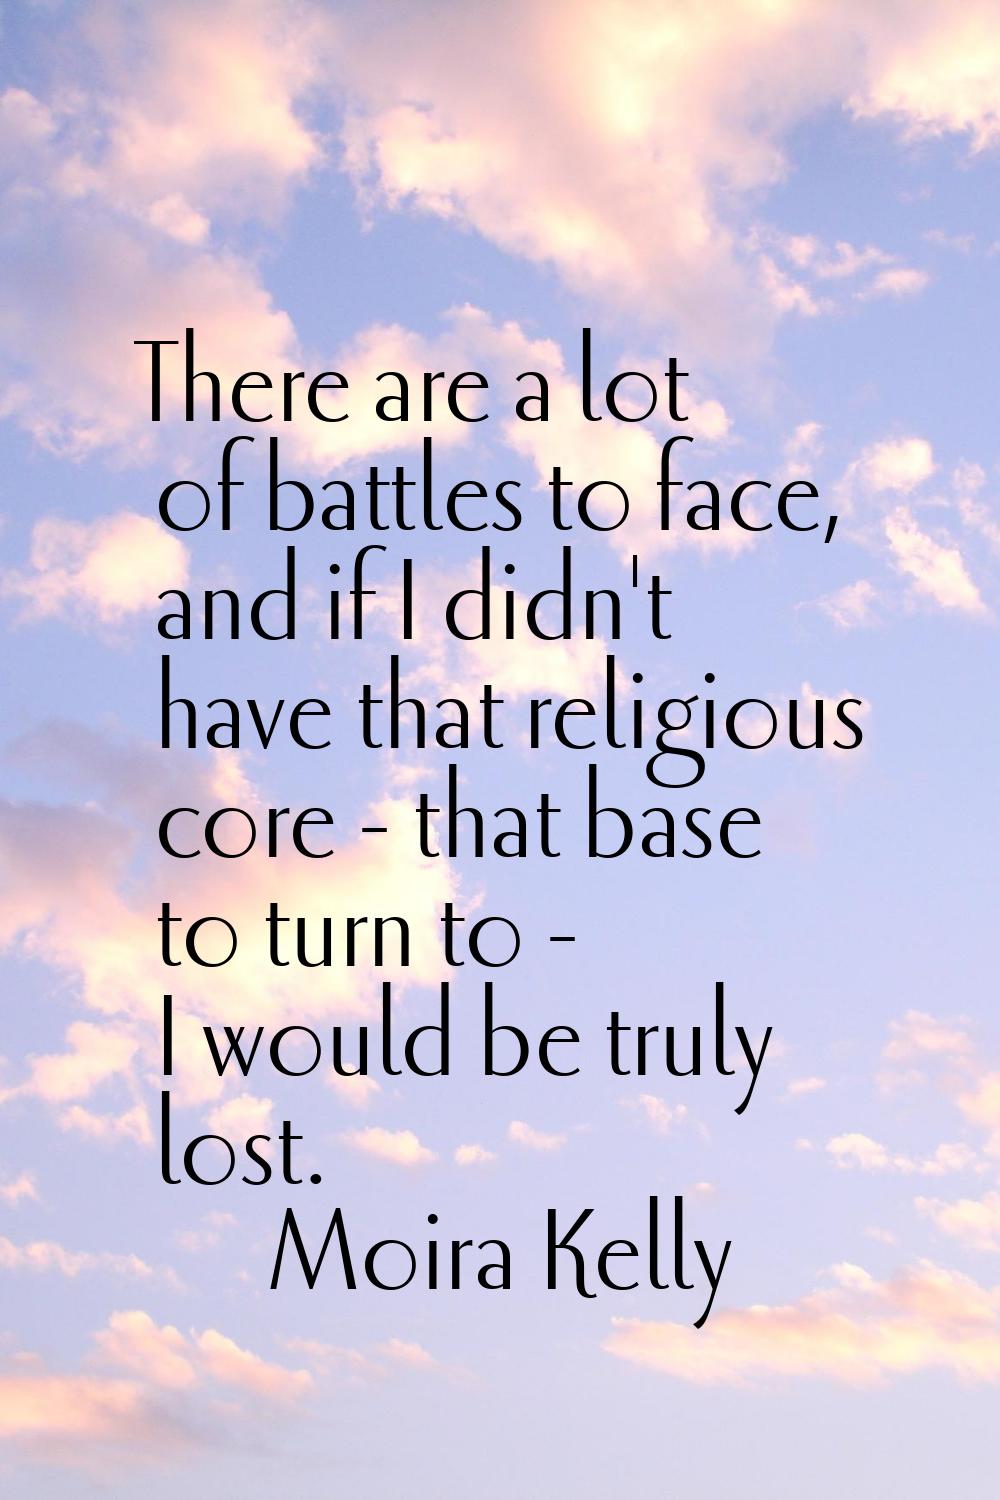 There are a lot of battles to face, and if I didn't have that religious core - that base to turn to